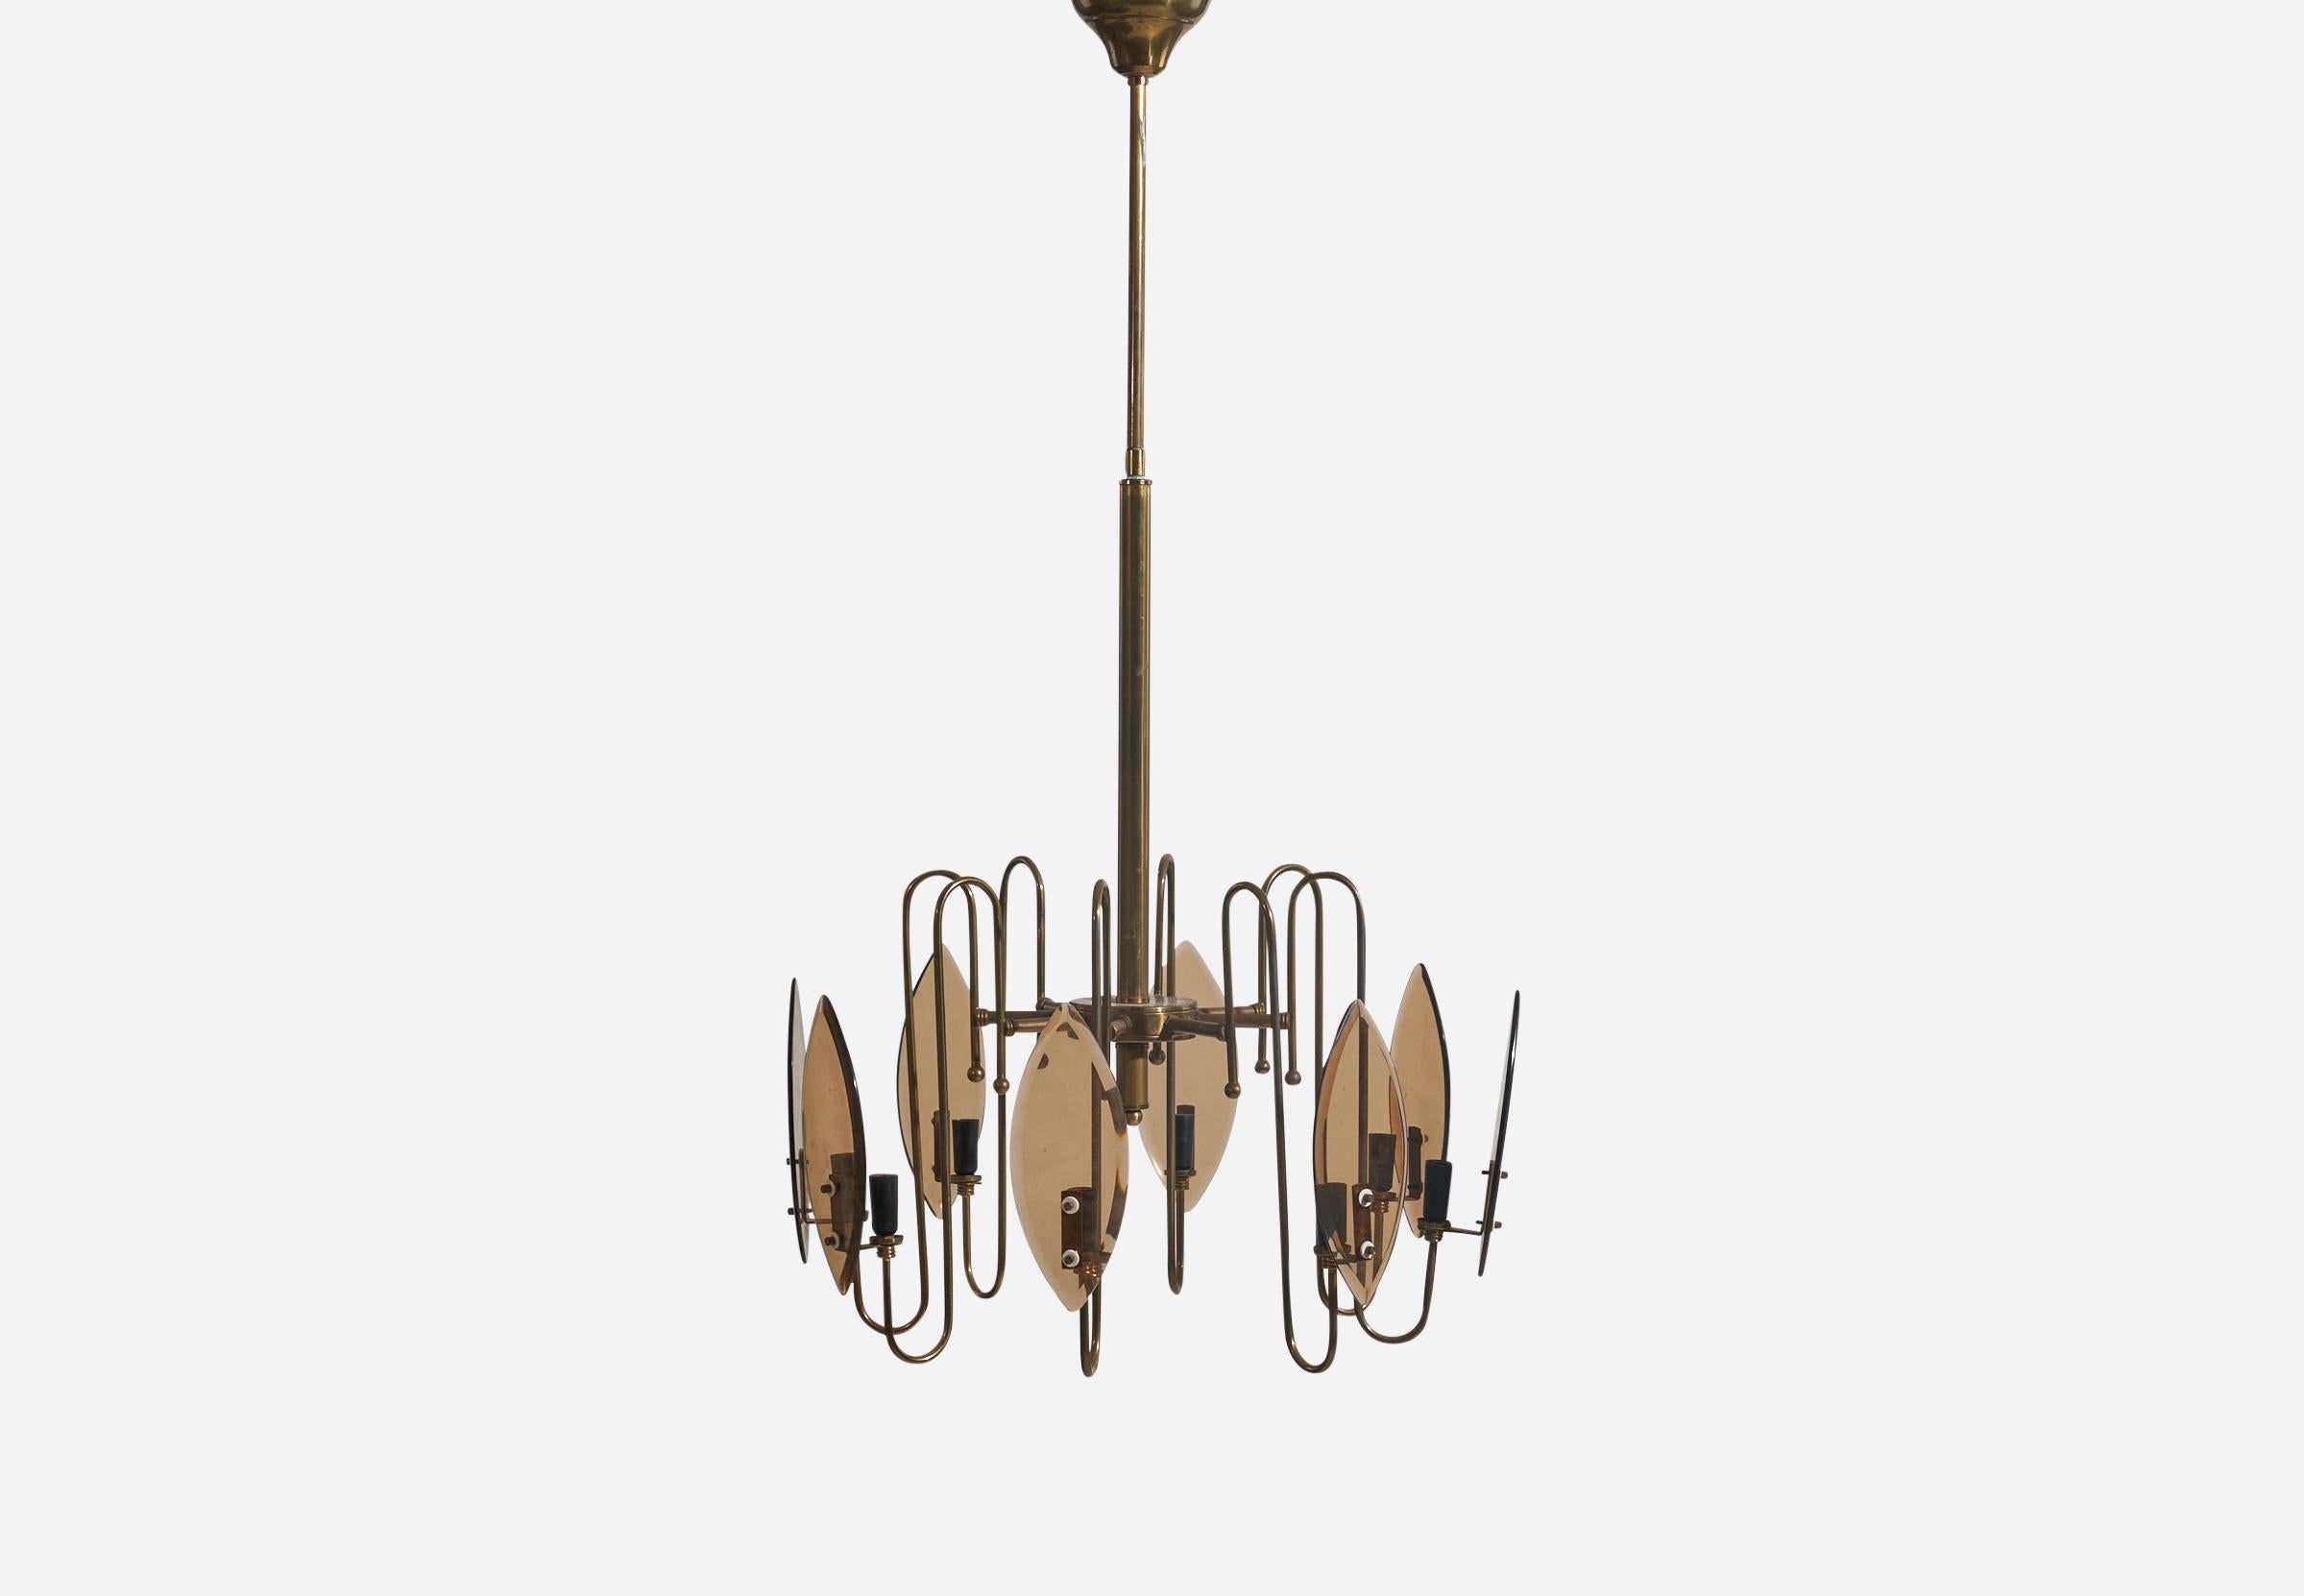 A brass and glass, 8-light chandelier designed and produced in Italy, 1950s.

Dimensions of canopy (inches) : 2.72 x 4.43 x 4.43 (Height x Width x Depth).

Socket takes E-14 bulb. 
There is no maximum wattage stated on the fixture.